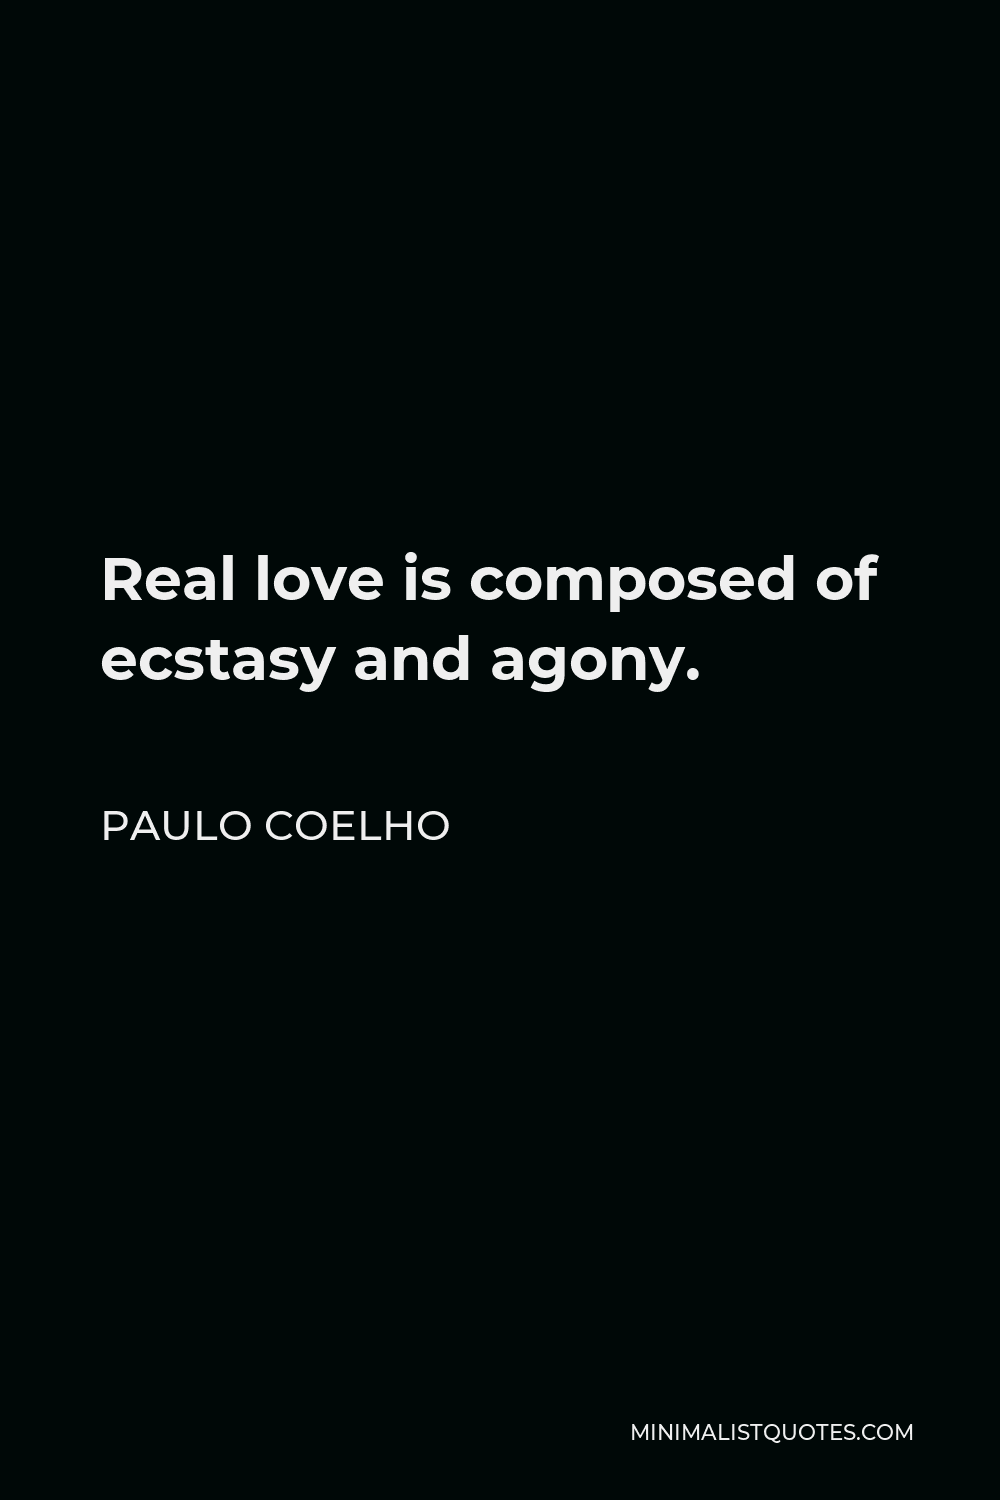 Coelho paulo about quotes love 140 Paulo